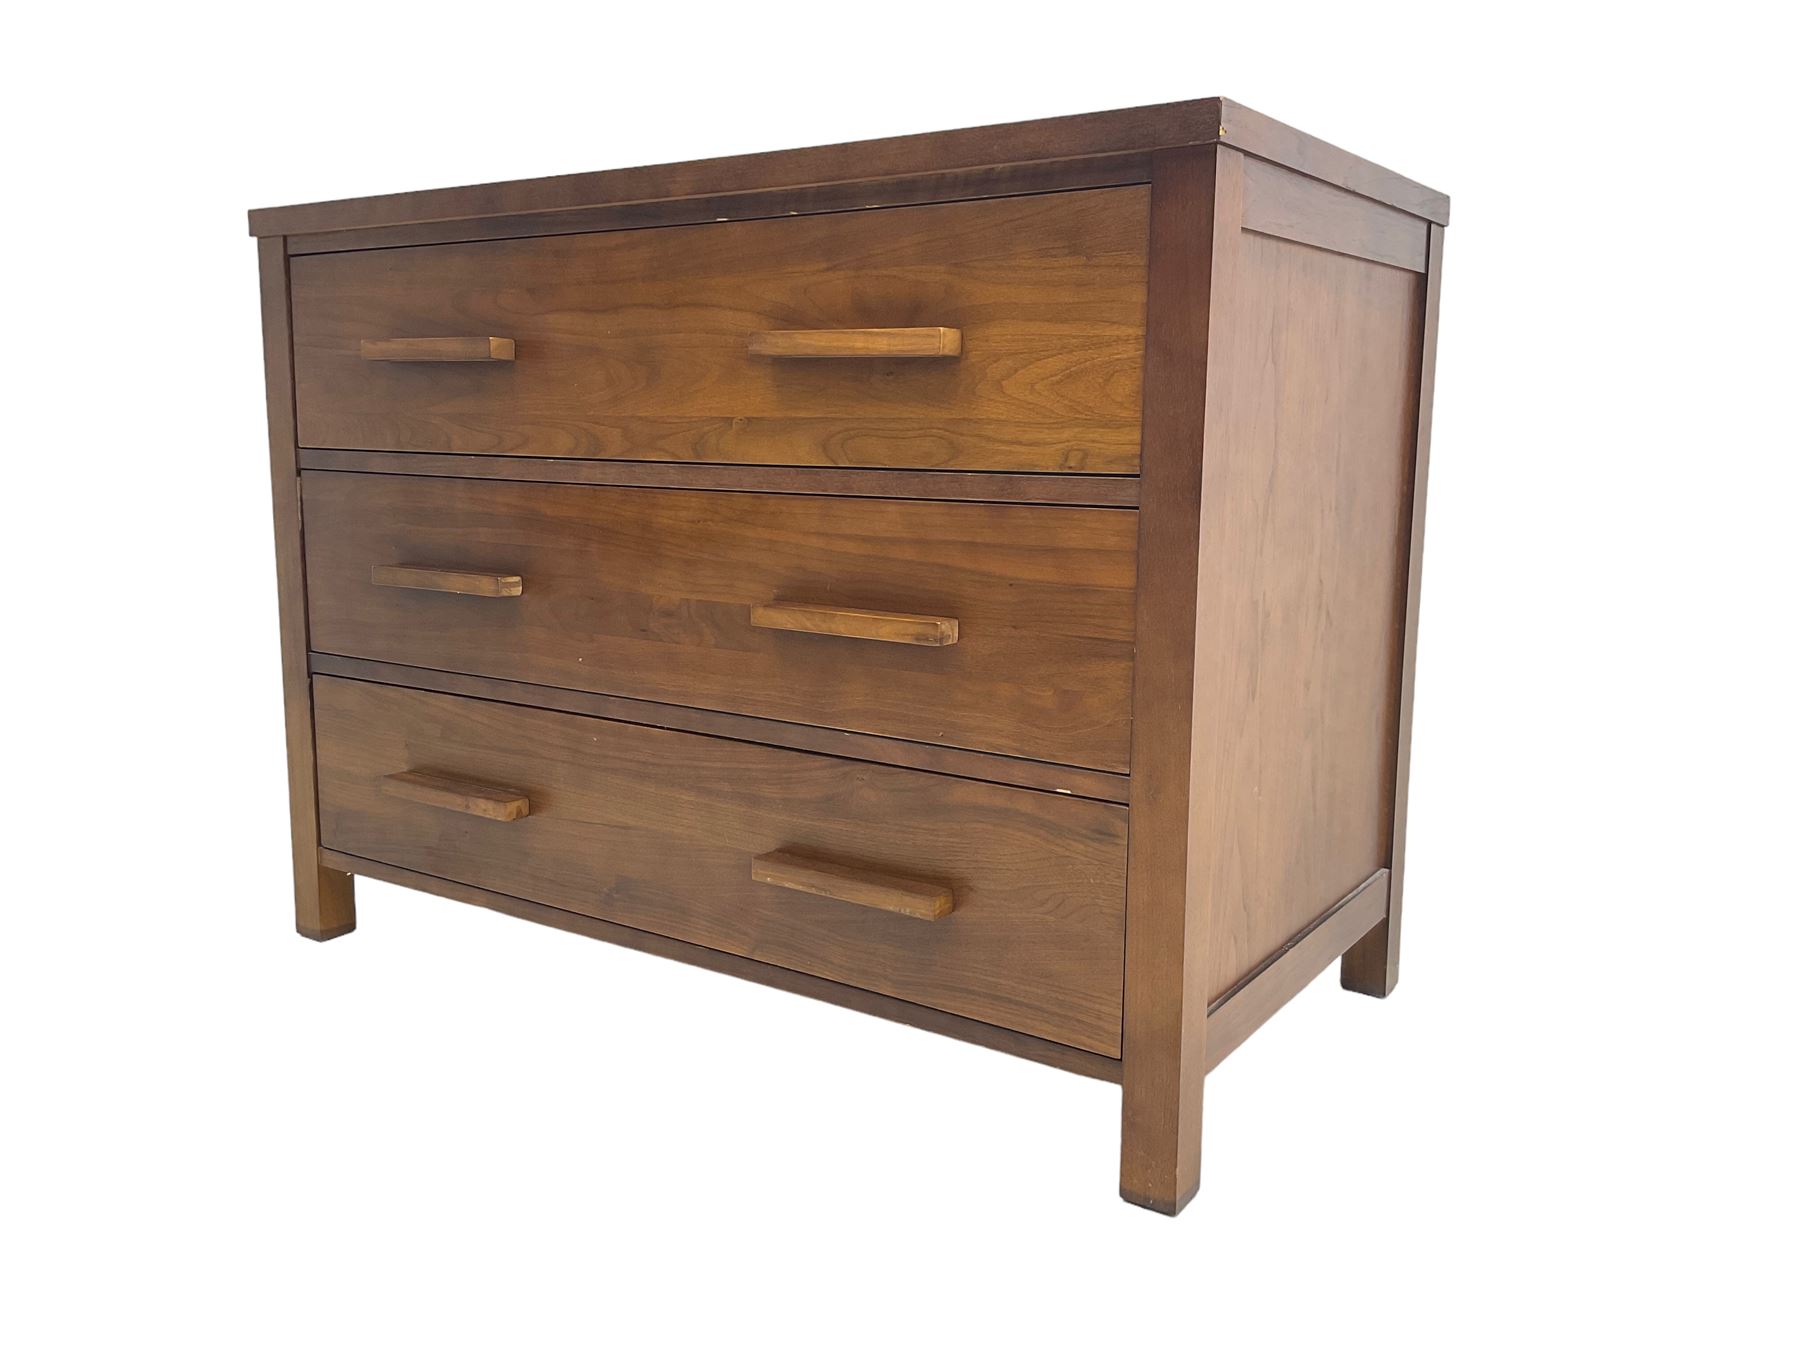 Large contemporary cherry wood chest - Image 4 of 8